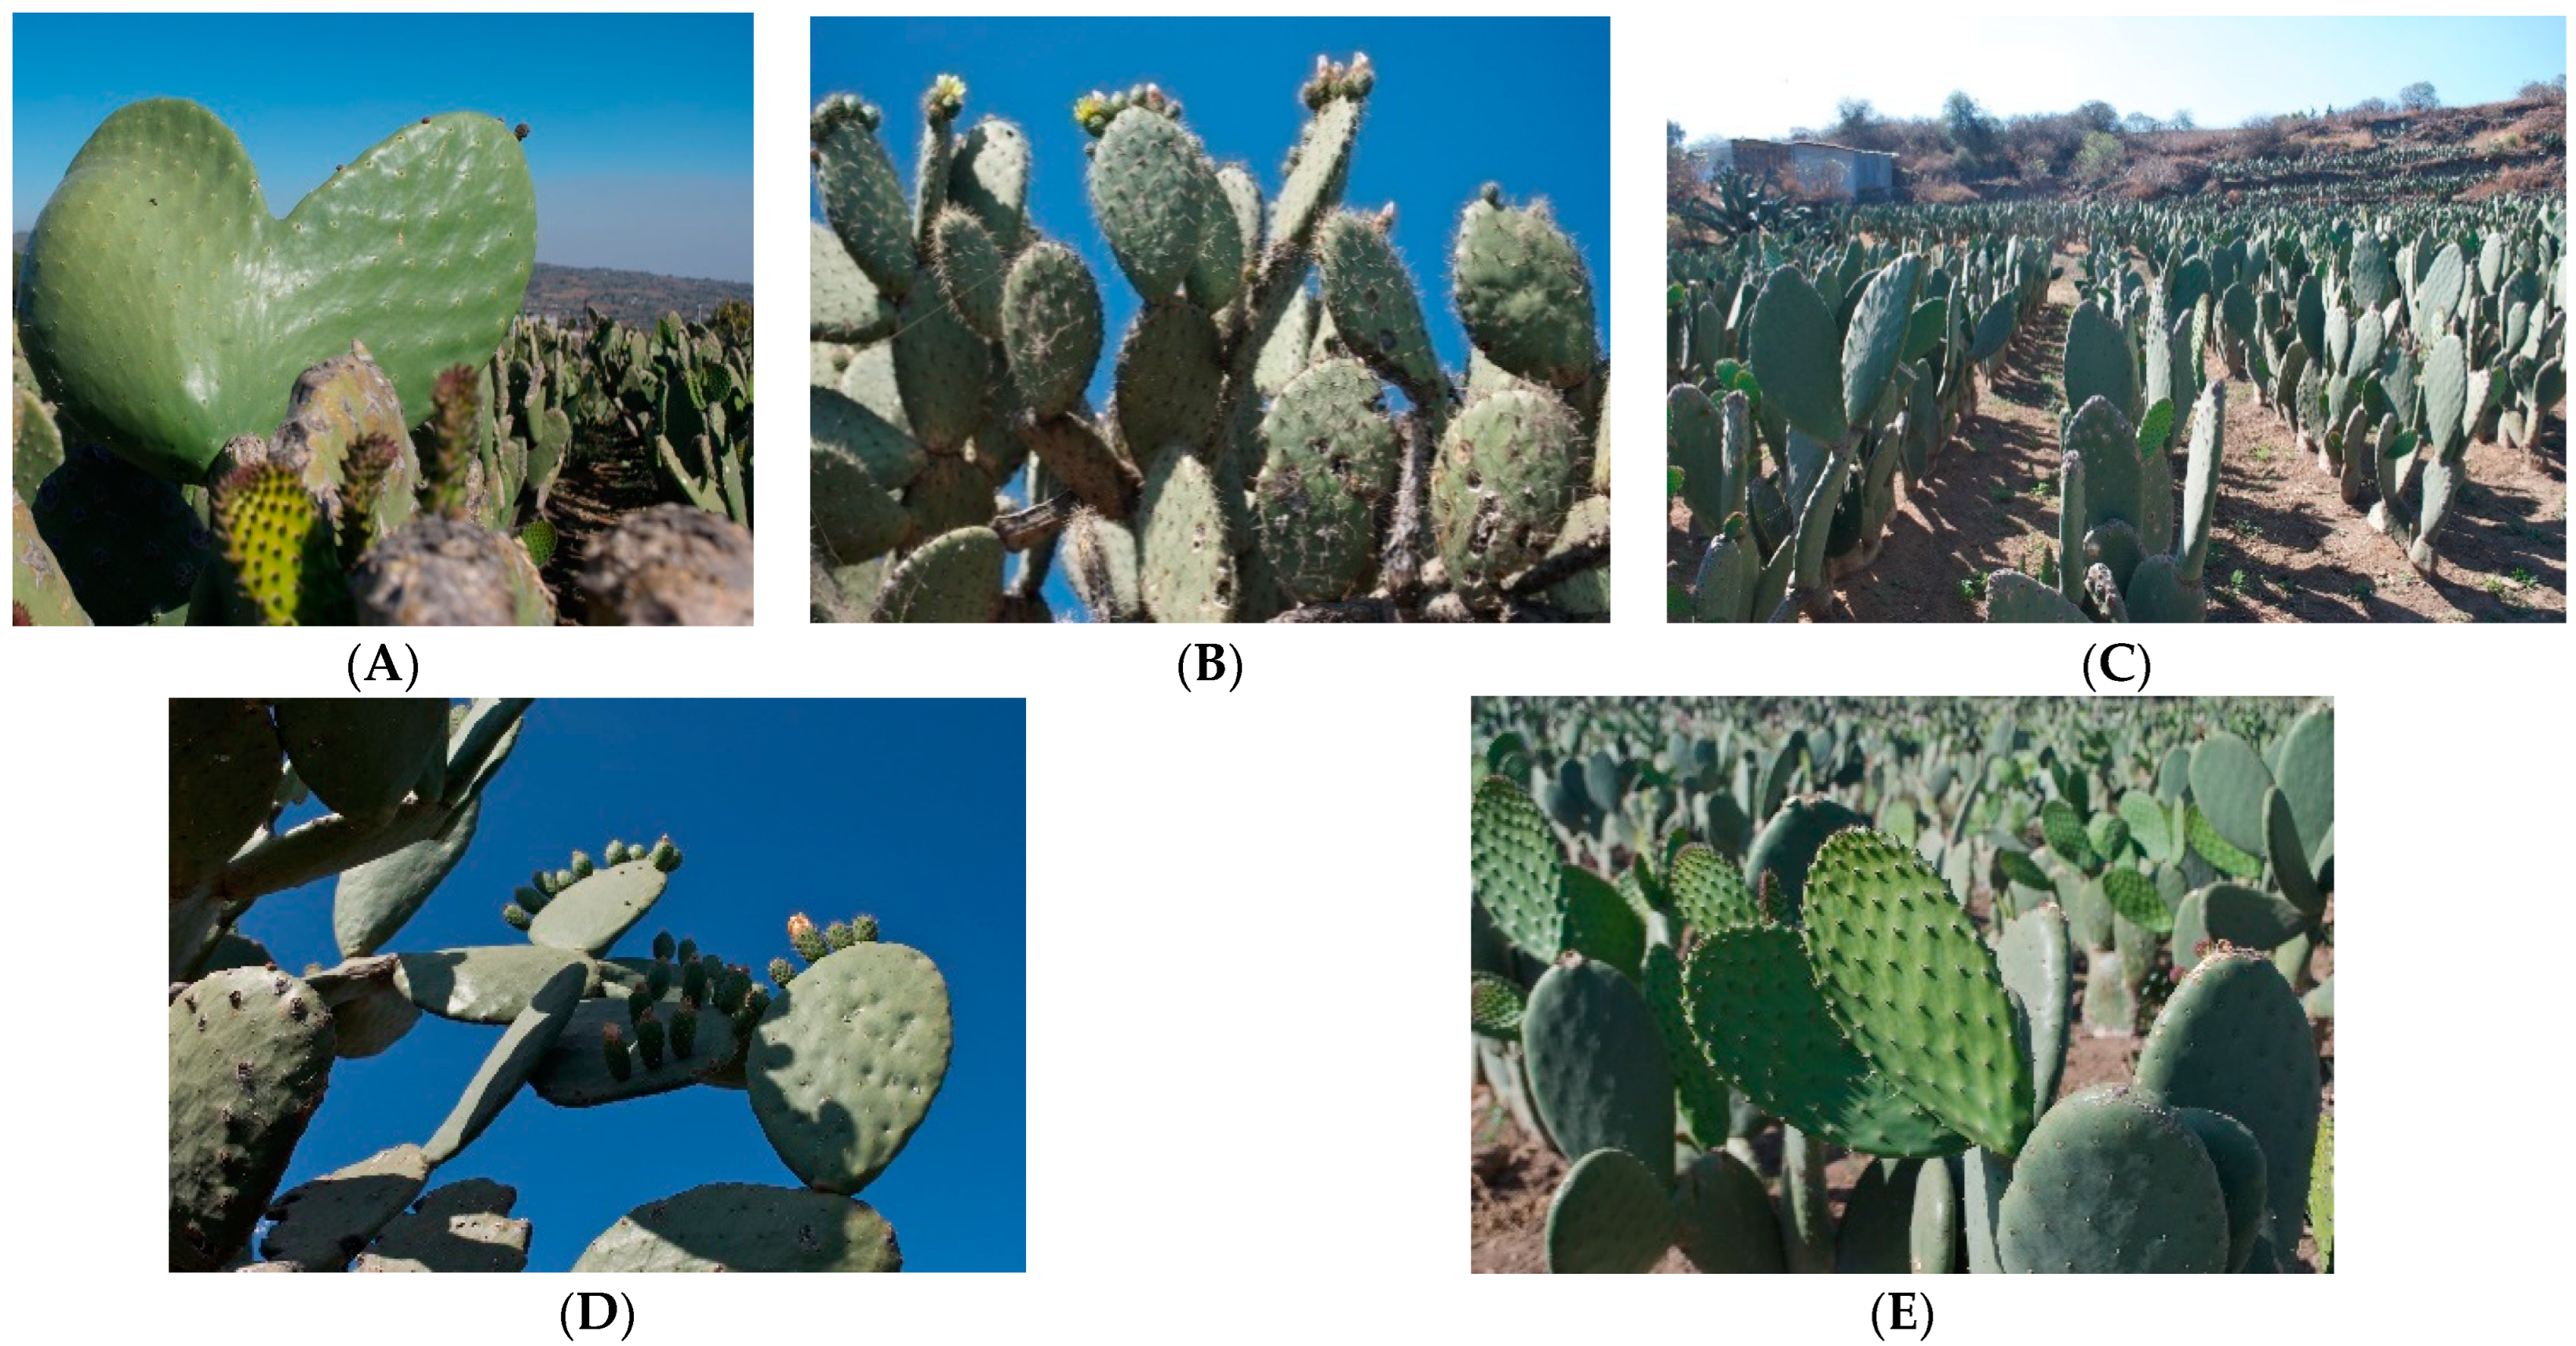 Is There a Market for Edible Cactus in the United States?, Innovation